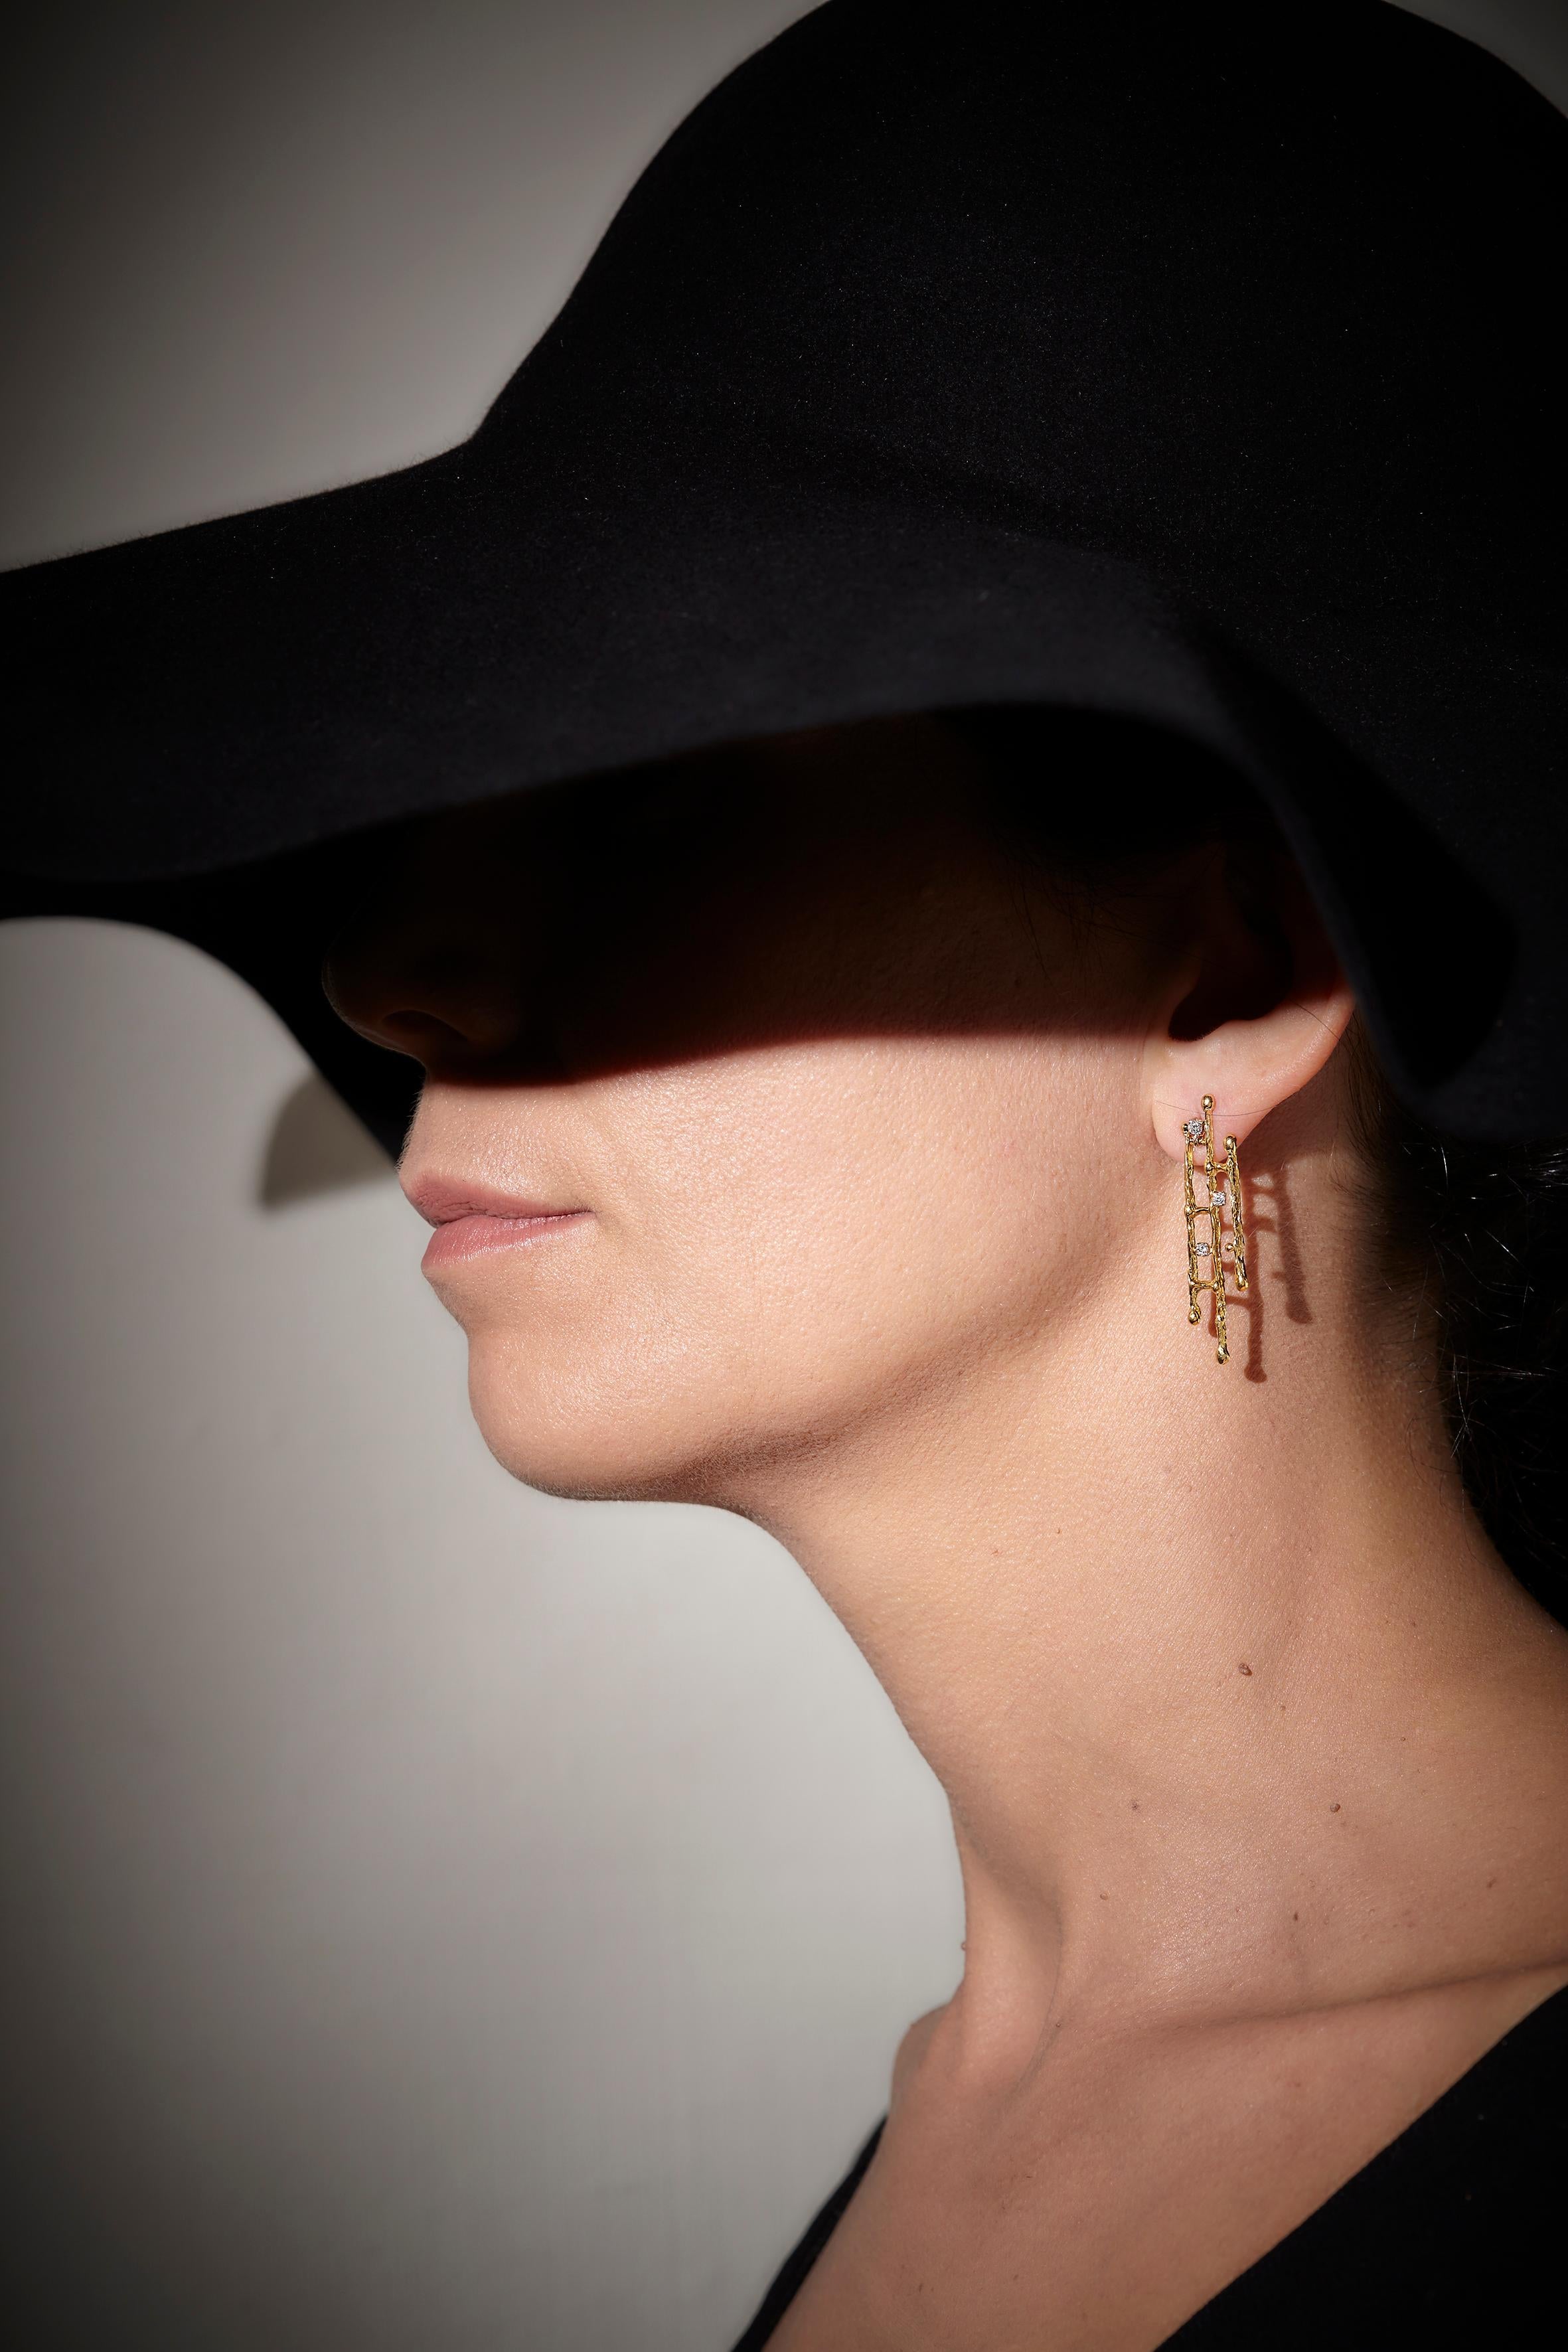 18k Yellow Gold Diamonds Made in Italy  Grounding Empowerment Dangle Earrings.
Experience the Empowerment of Gemstones with the Halley Earrings - inspired by Celestial Beauty and Energized by Earth.
Unlock Your Divine Potential with the Halley